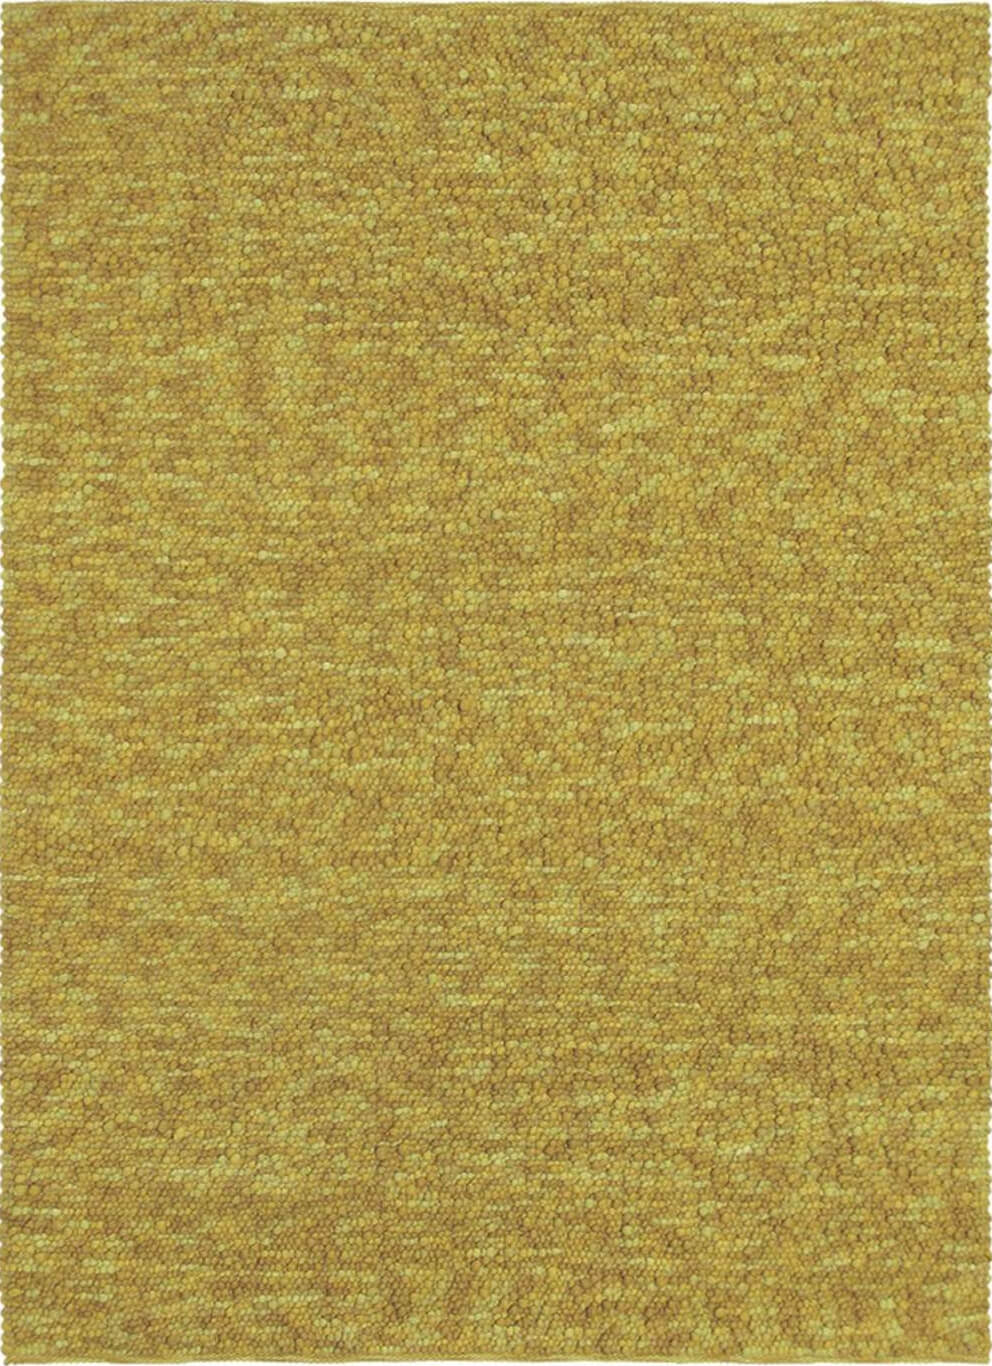 Stubble 29706 Rug by Brink & Campman ☞ Size: 170 x 230 cm